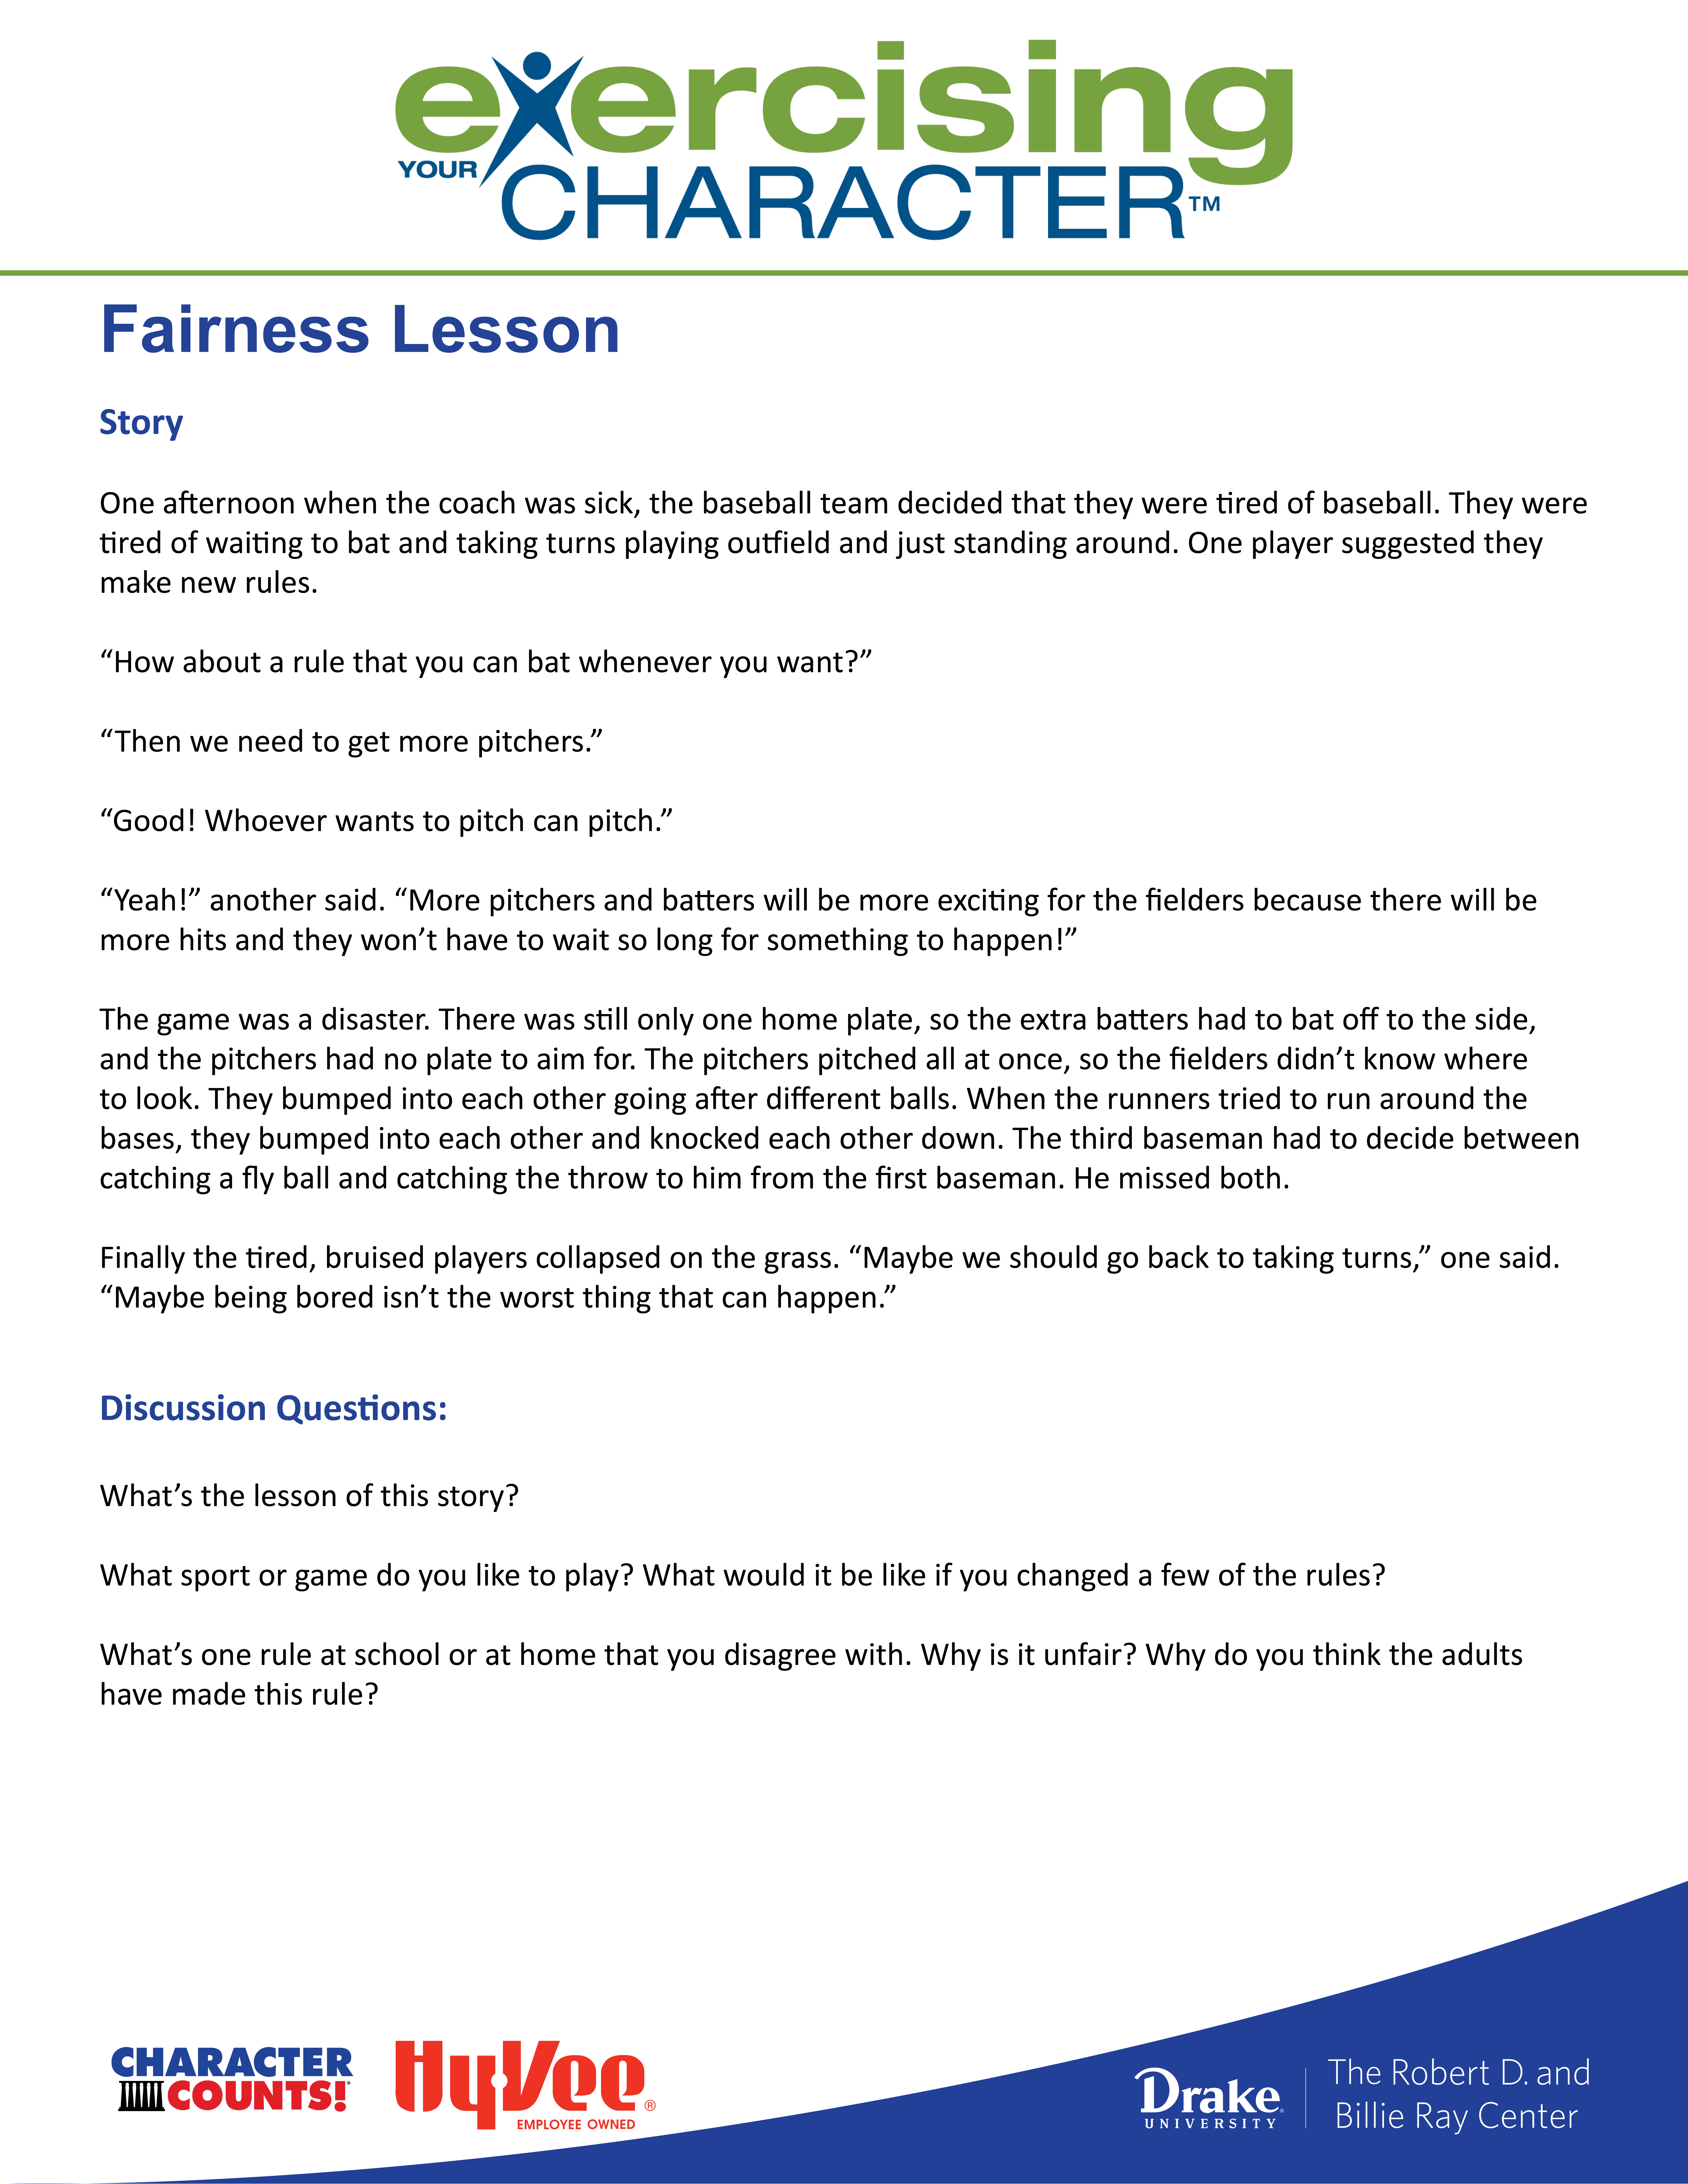 Exercising Your Character - Fairness Lesson